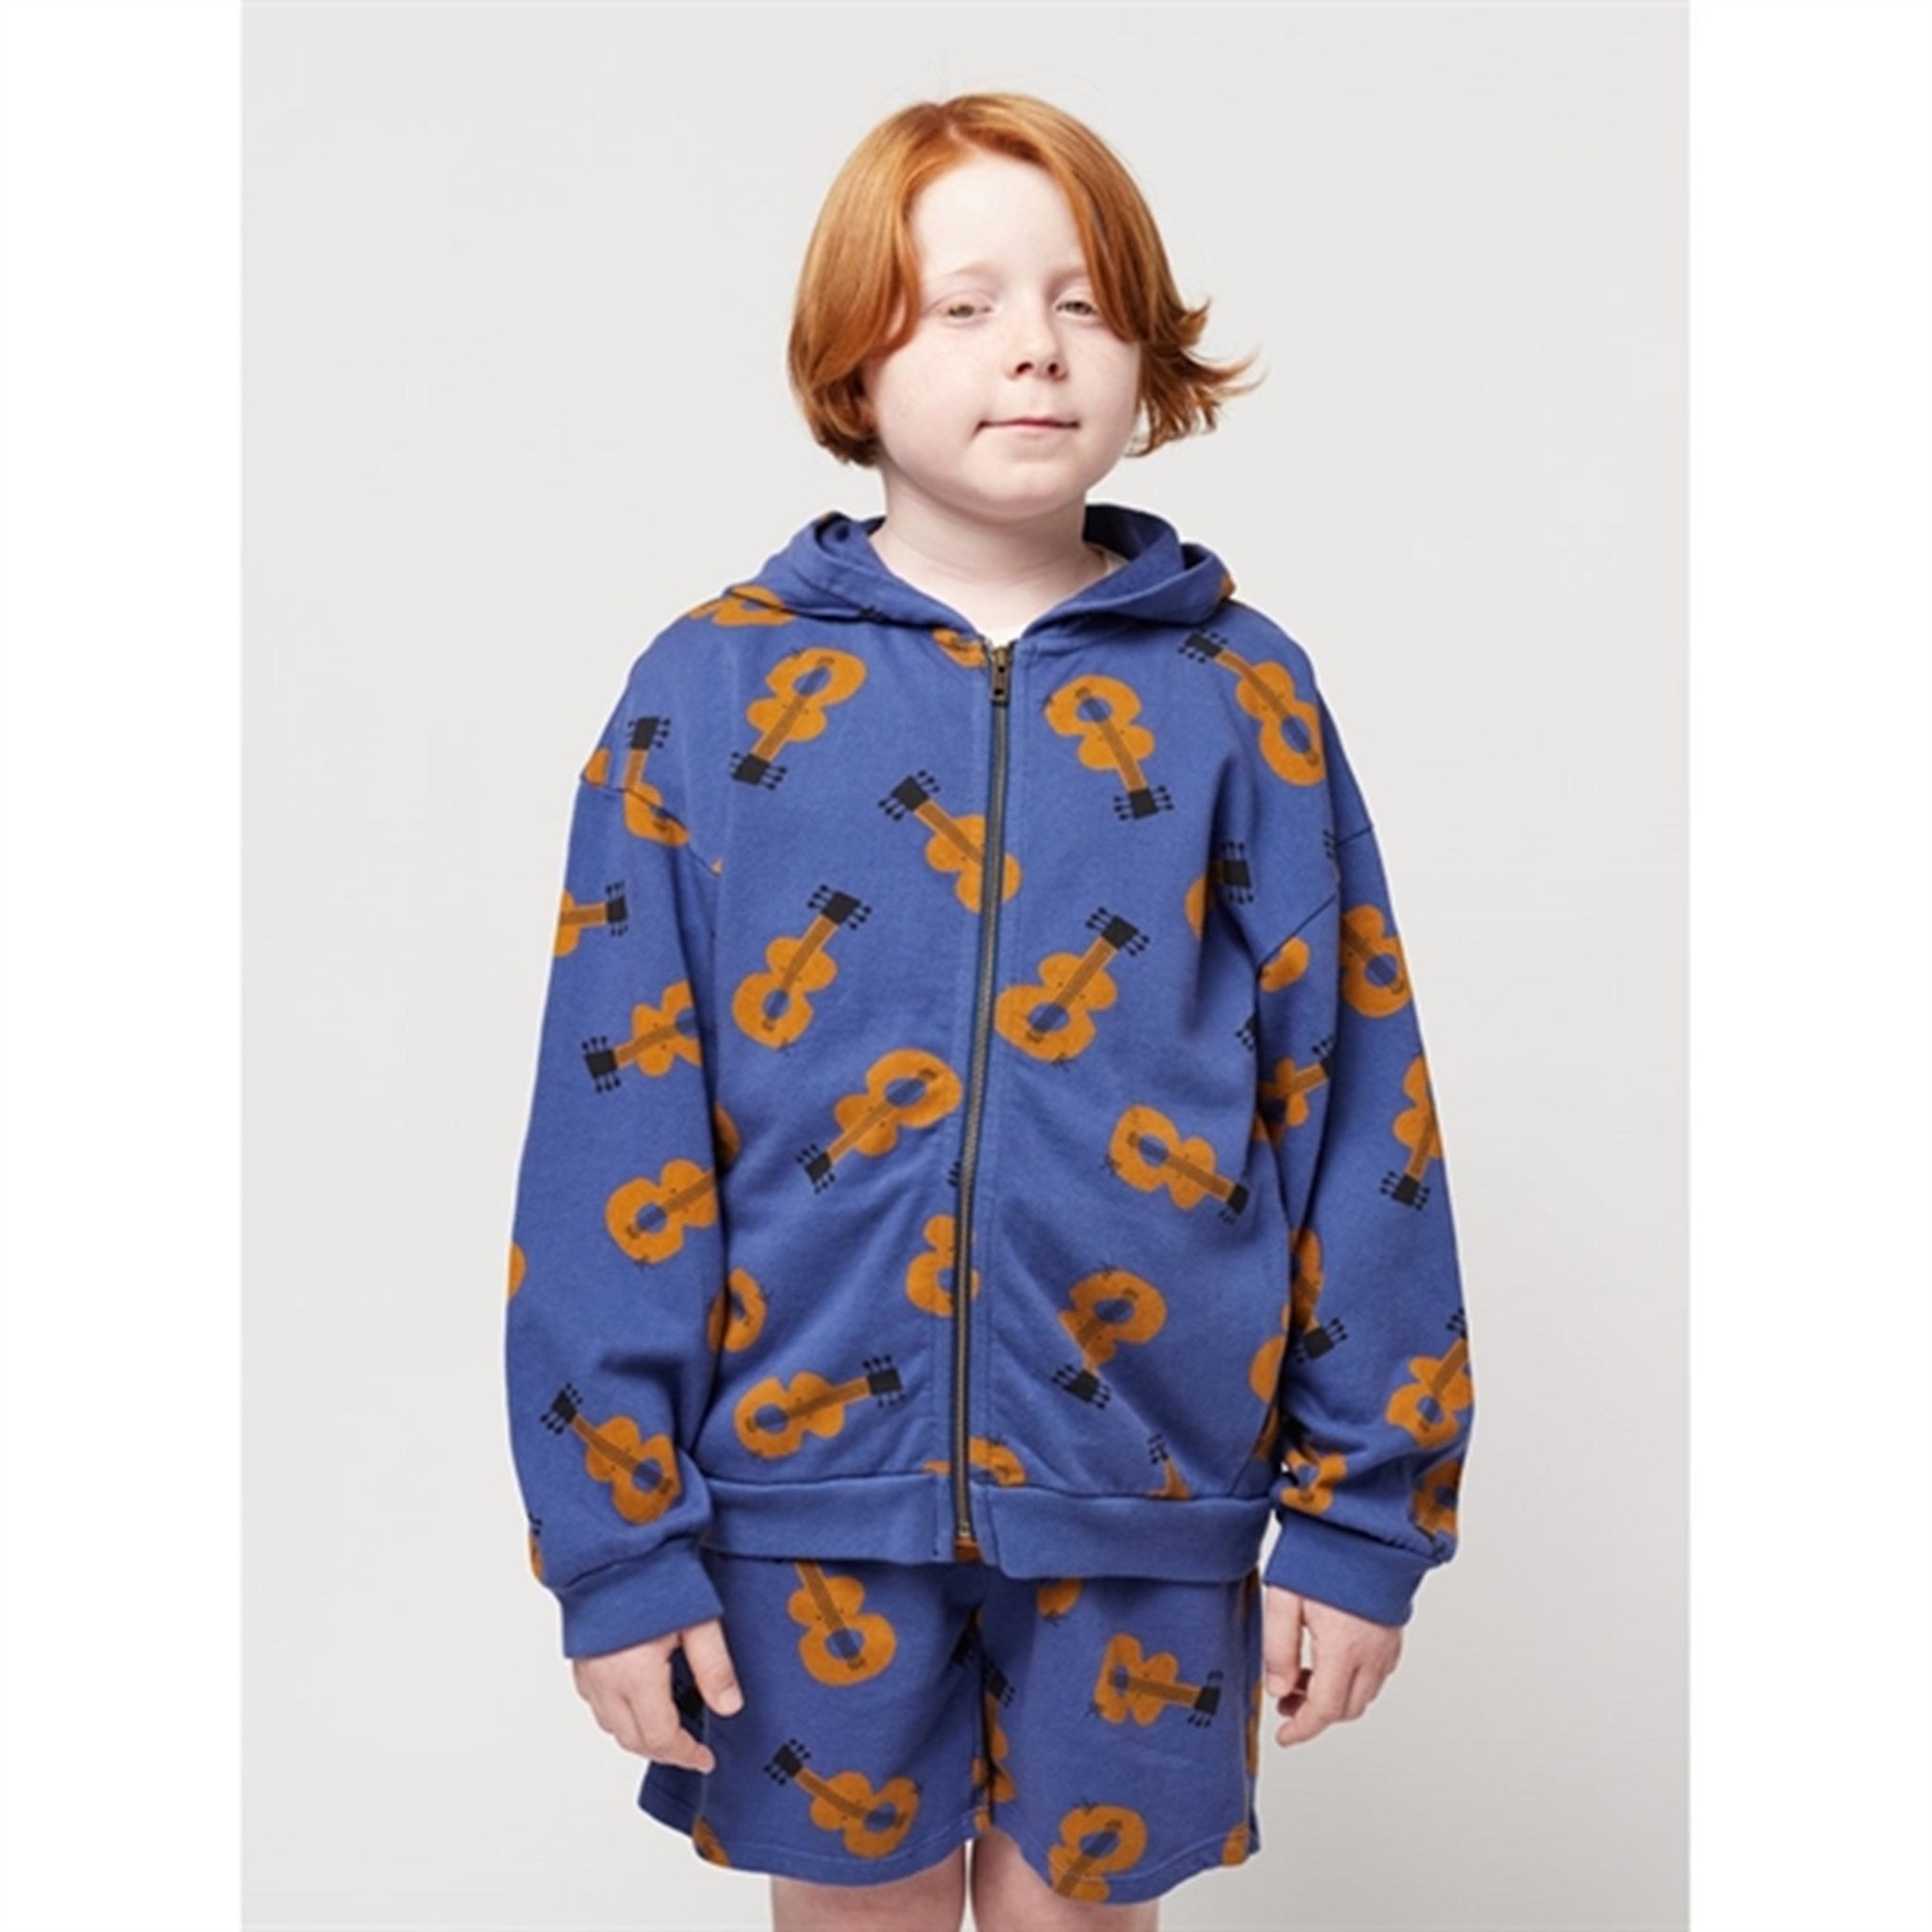 Bobo Choses Acoustic Guitar All Over Zipped Hoodie Navy Blue 2